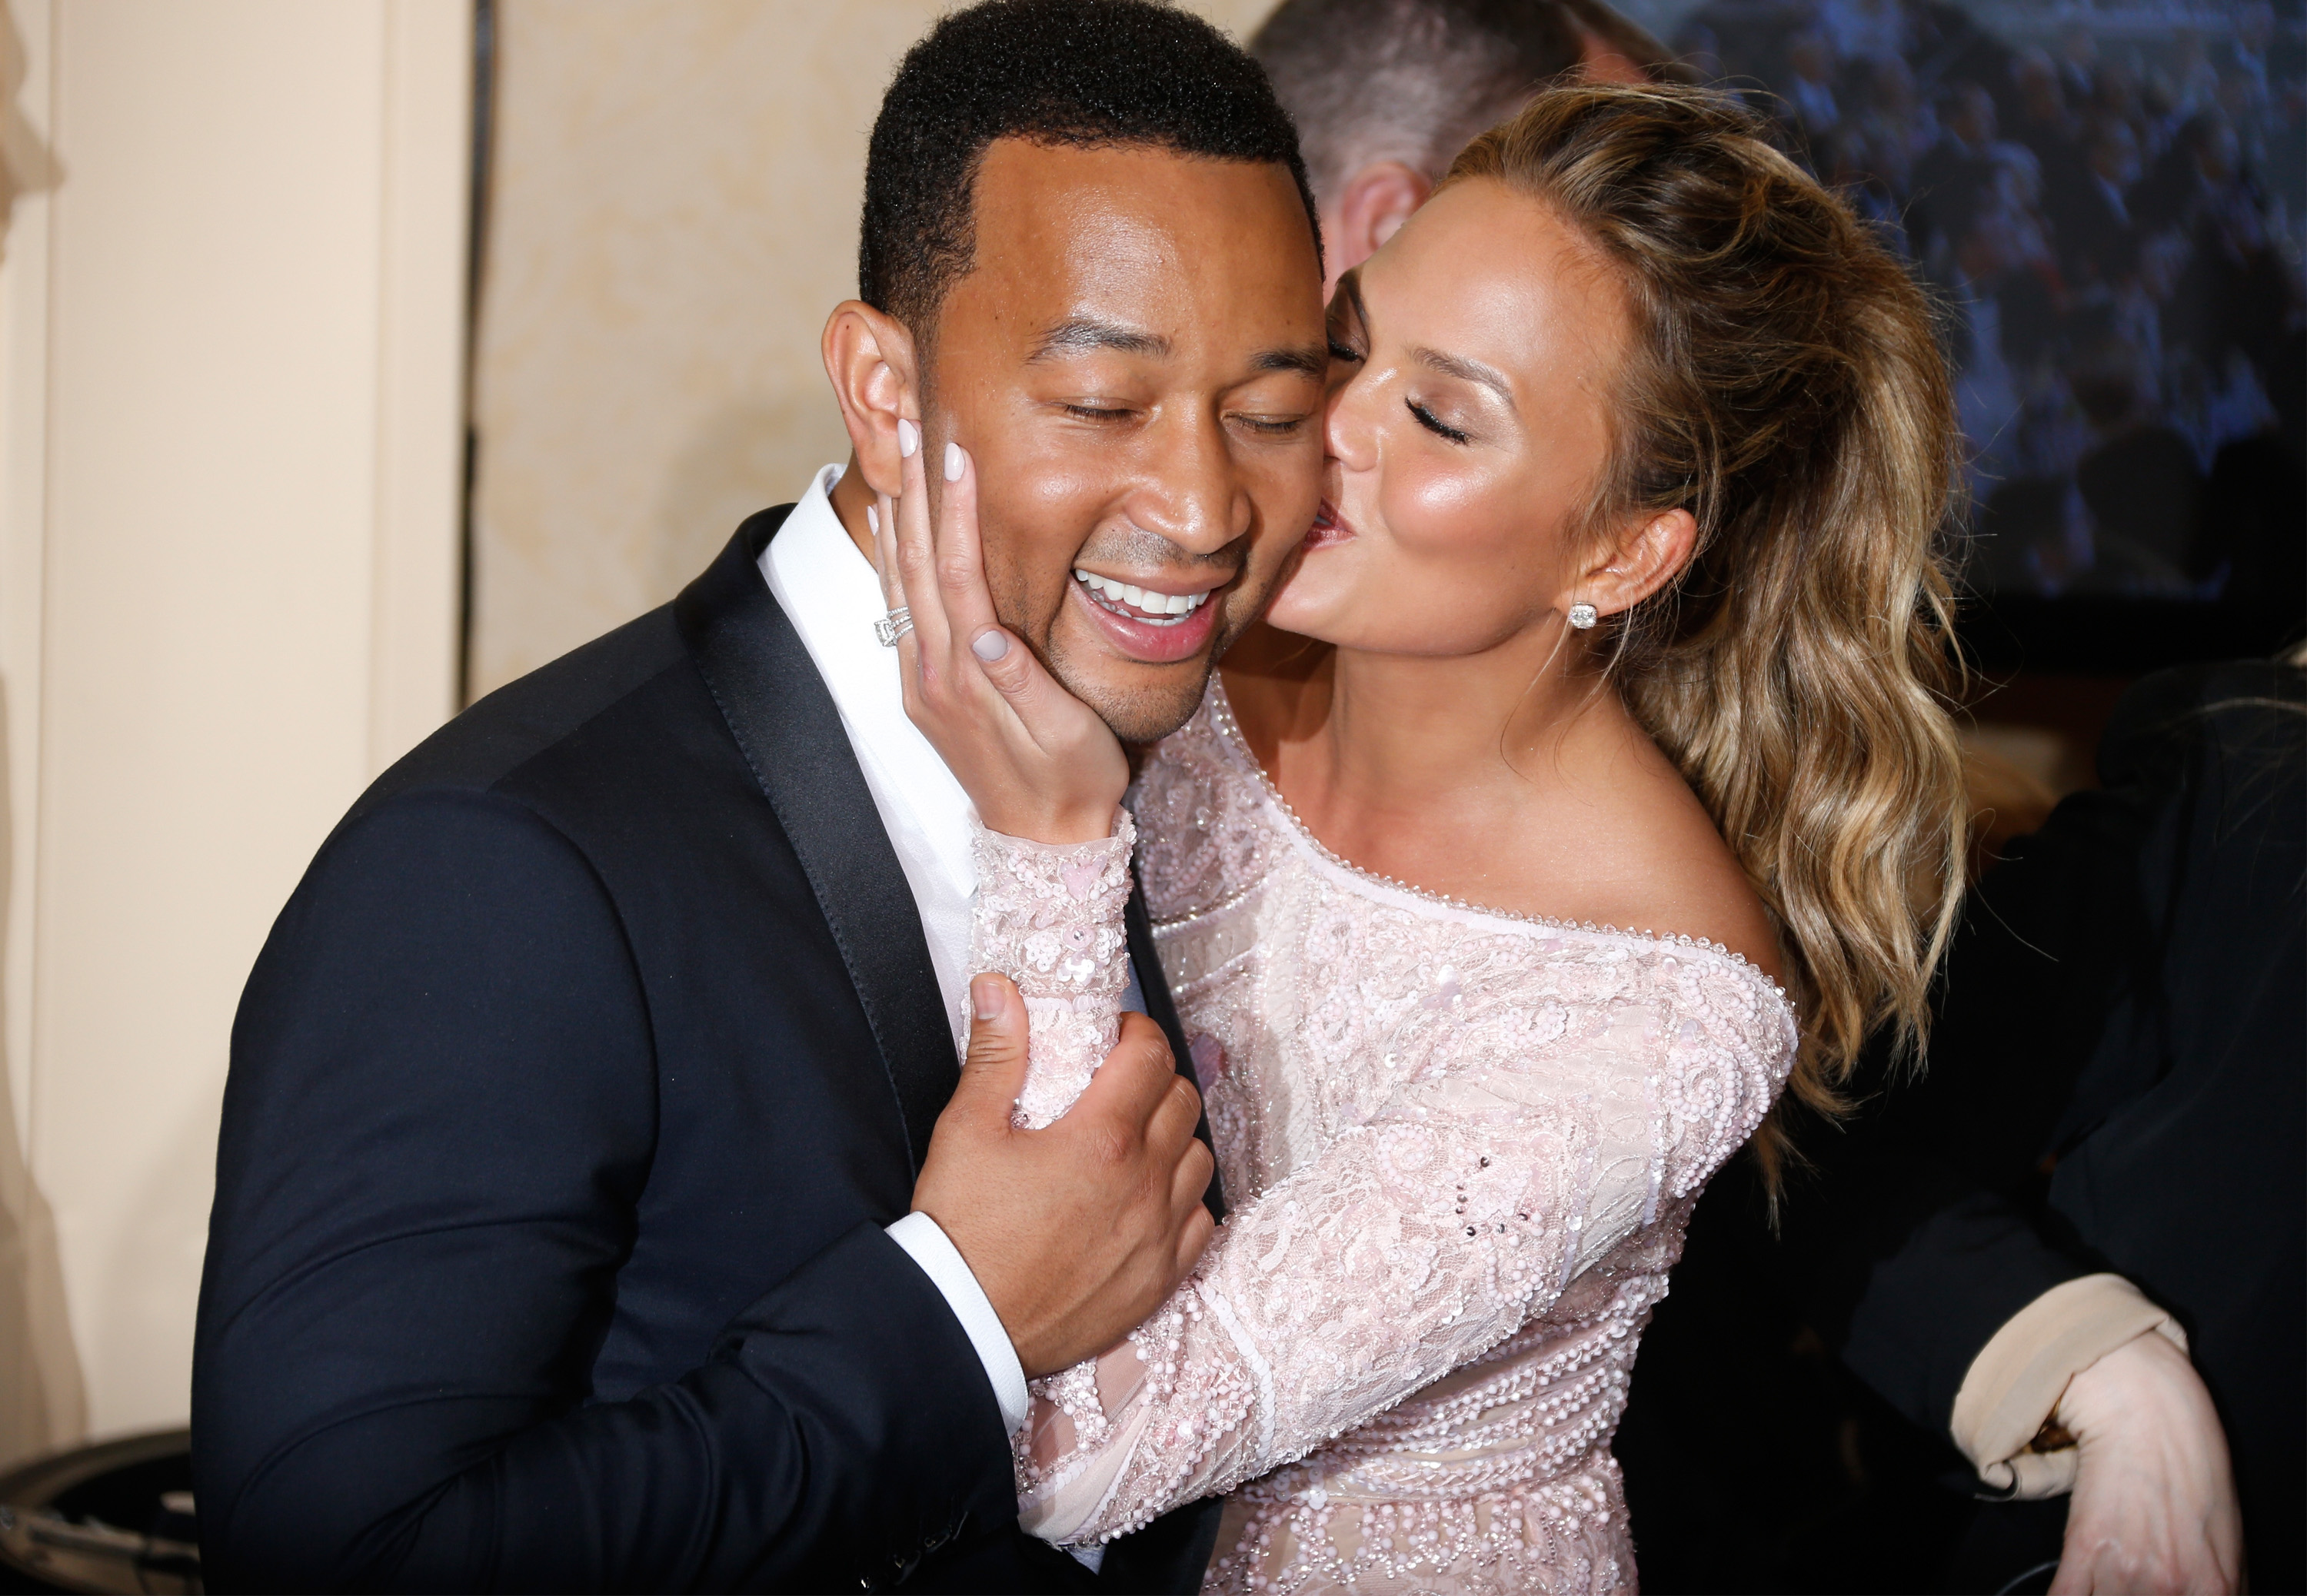 John Legend and Chrissy Teigen at the 72nd Annual Golden Globe Awards in Beverly Hills, 2015. | Source: Getty Images